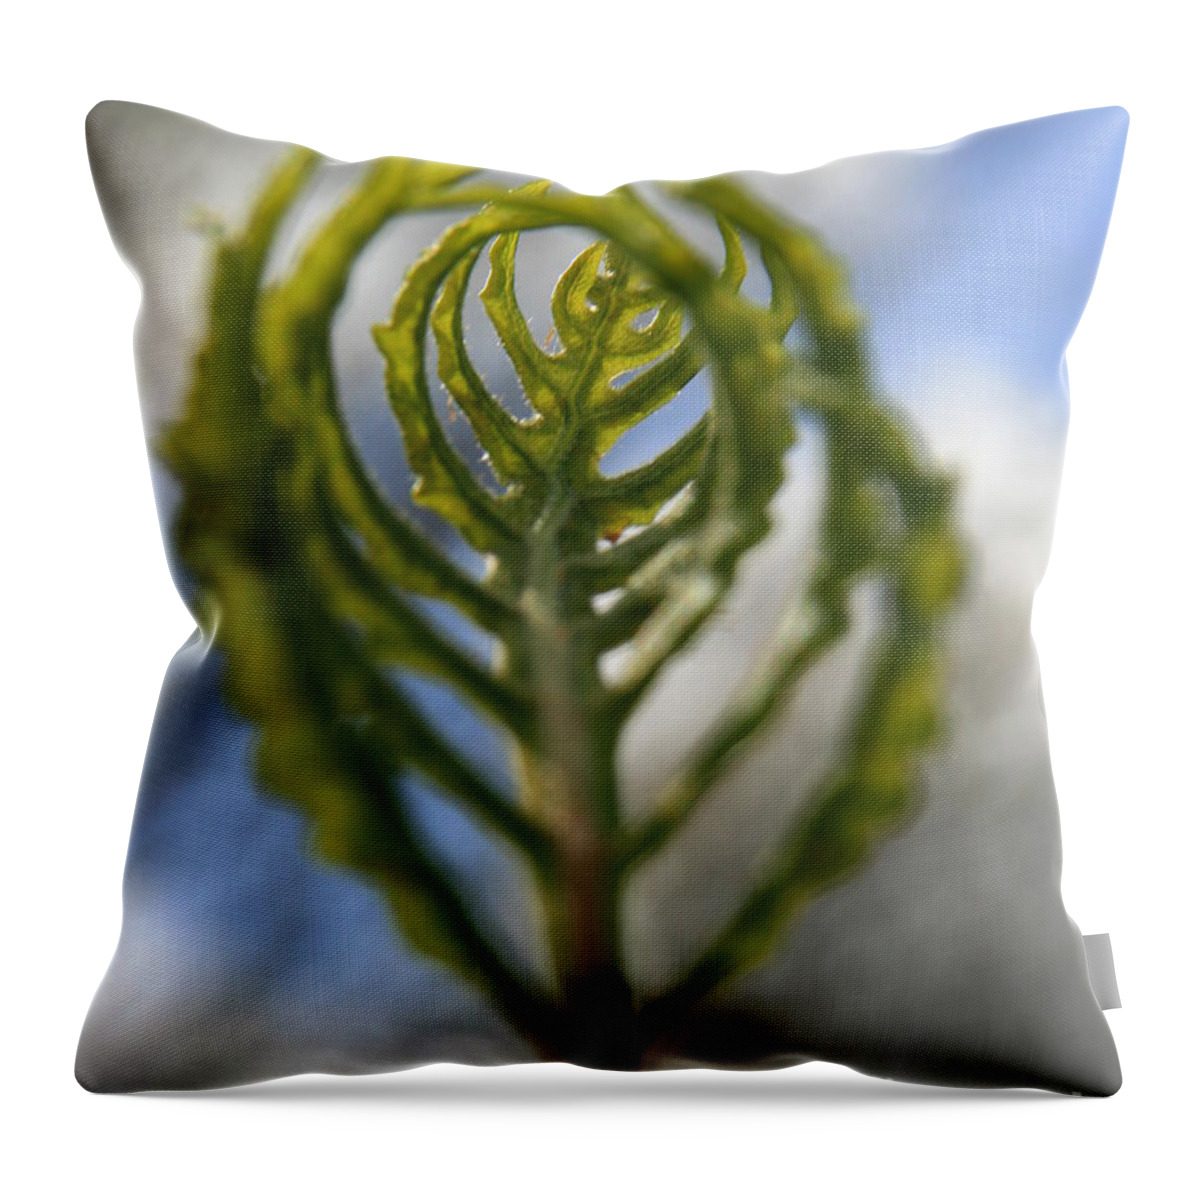 Fern Throw Pillow featuring the photograph Unwrapped by Neal Eslinger